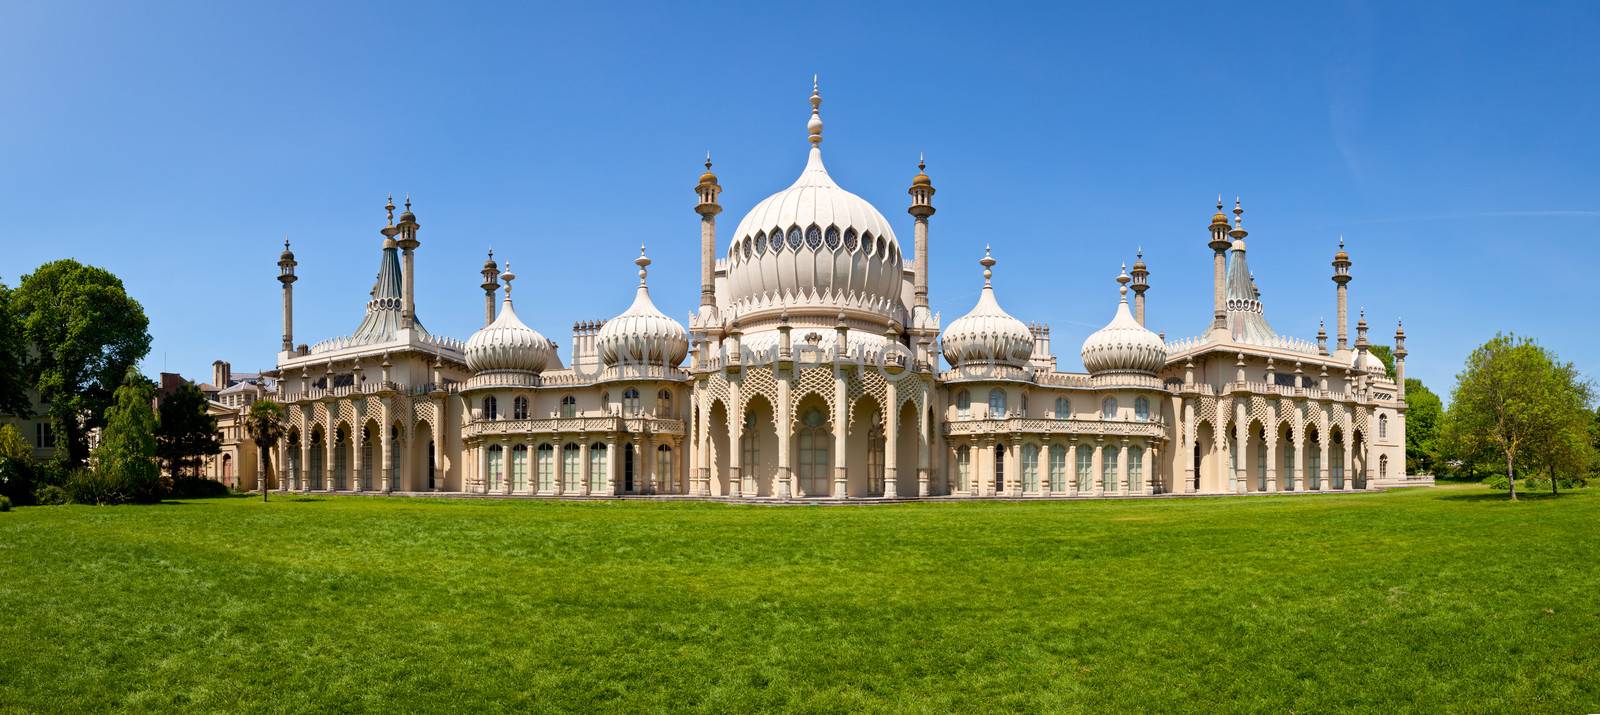 Panoramic view of the Royal Pavilion in Brighton, England